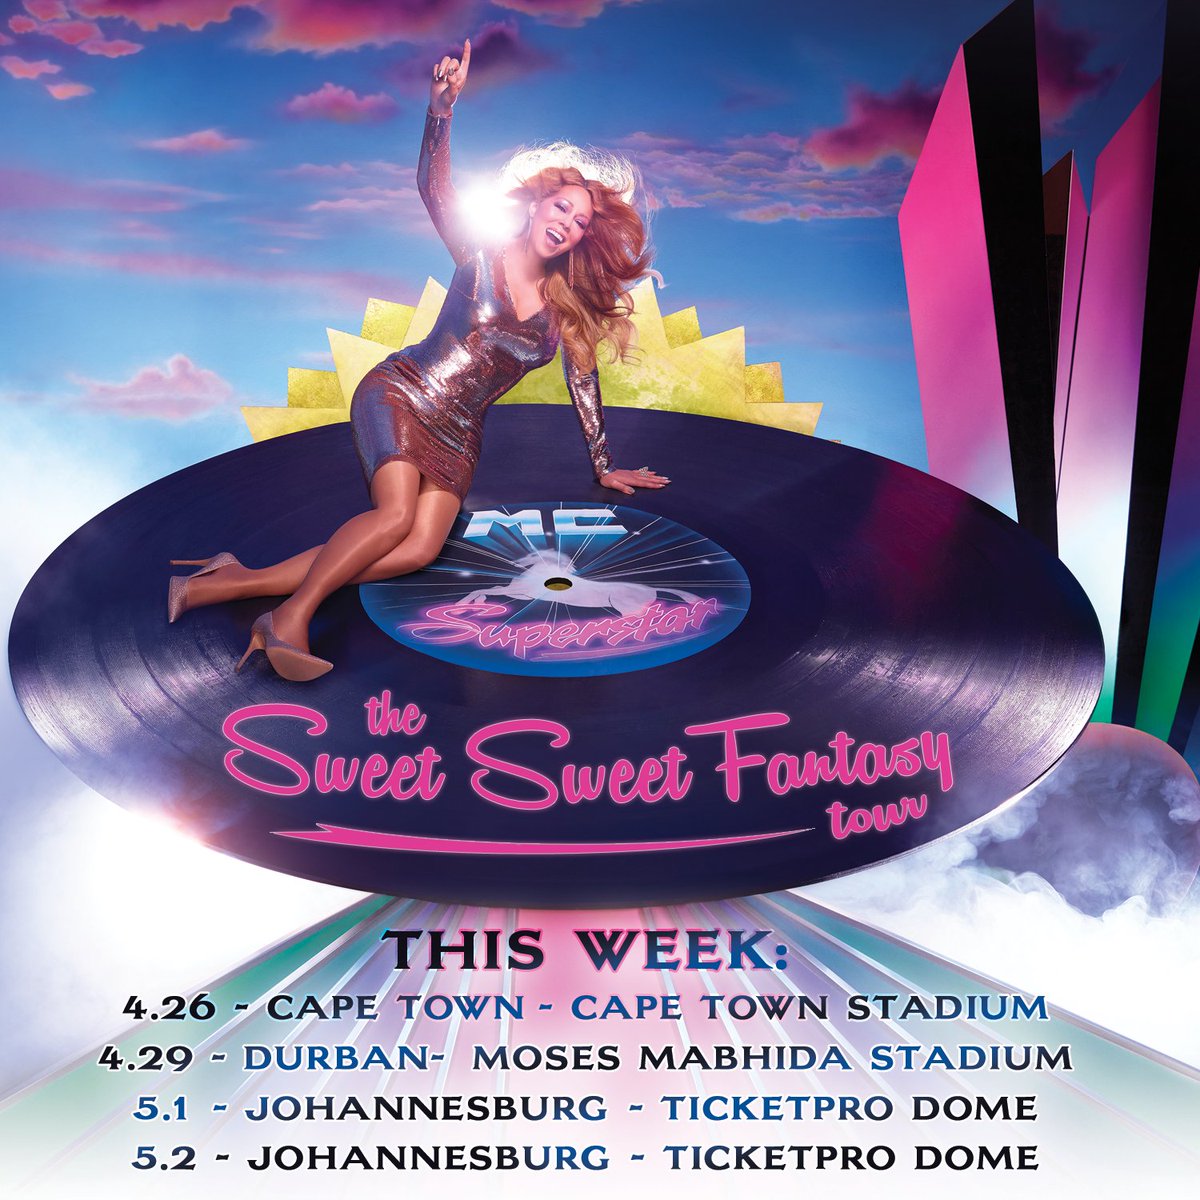 Who's joining me for the #sweetsweetfantasytour in South Africa? ???? #Lambs #Lambily https://t.co/T6mNDMNLYH https://t.co/cxgSYB4sfV